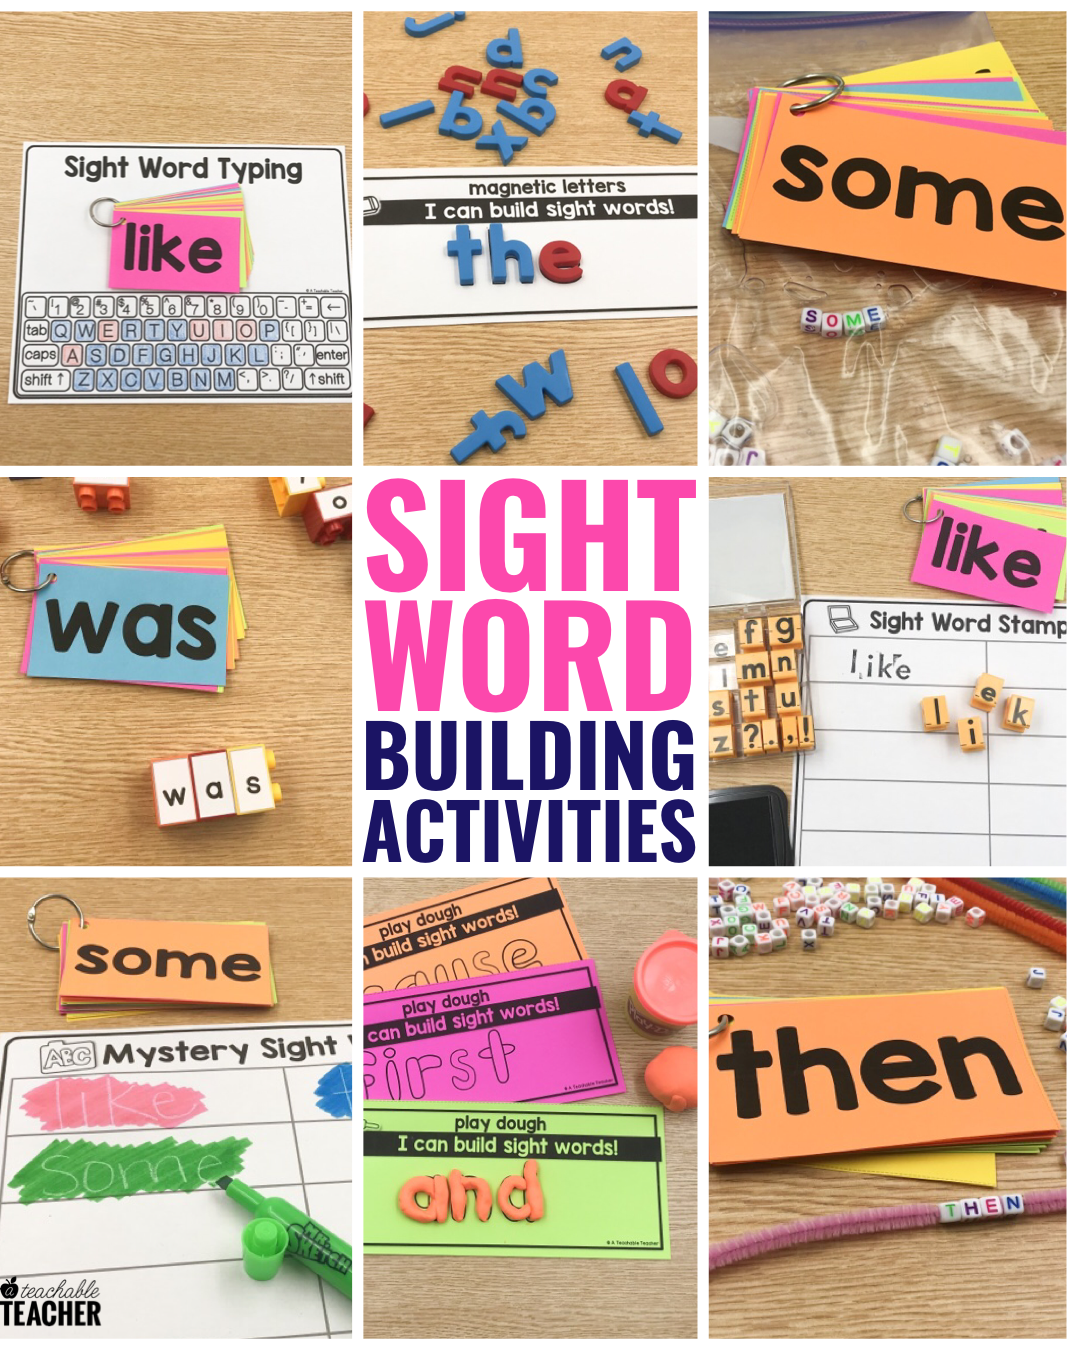 GAMENOTE Sight Words Kids Educational Flash Cards with Pictures & Sentences  - 220 Dolch Big Words Sight Word Games for Kids Age 3-9 Preschool (Pre K),  Kindergarten, 1st, 2nd, 3rd Grade -